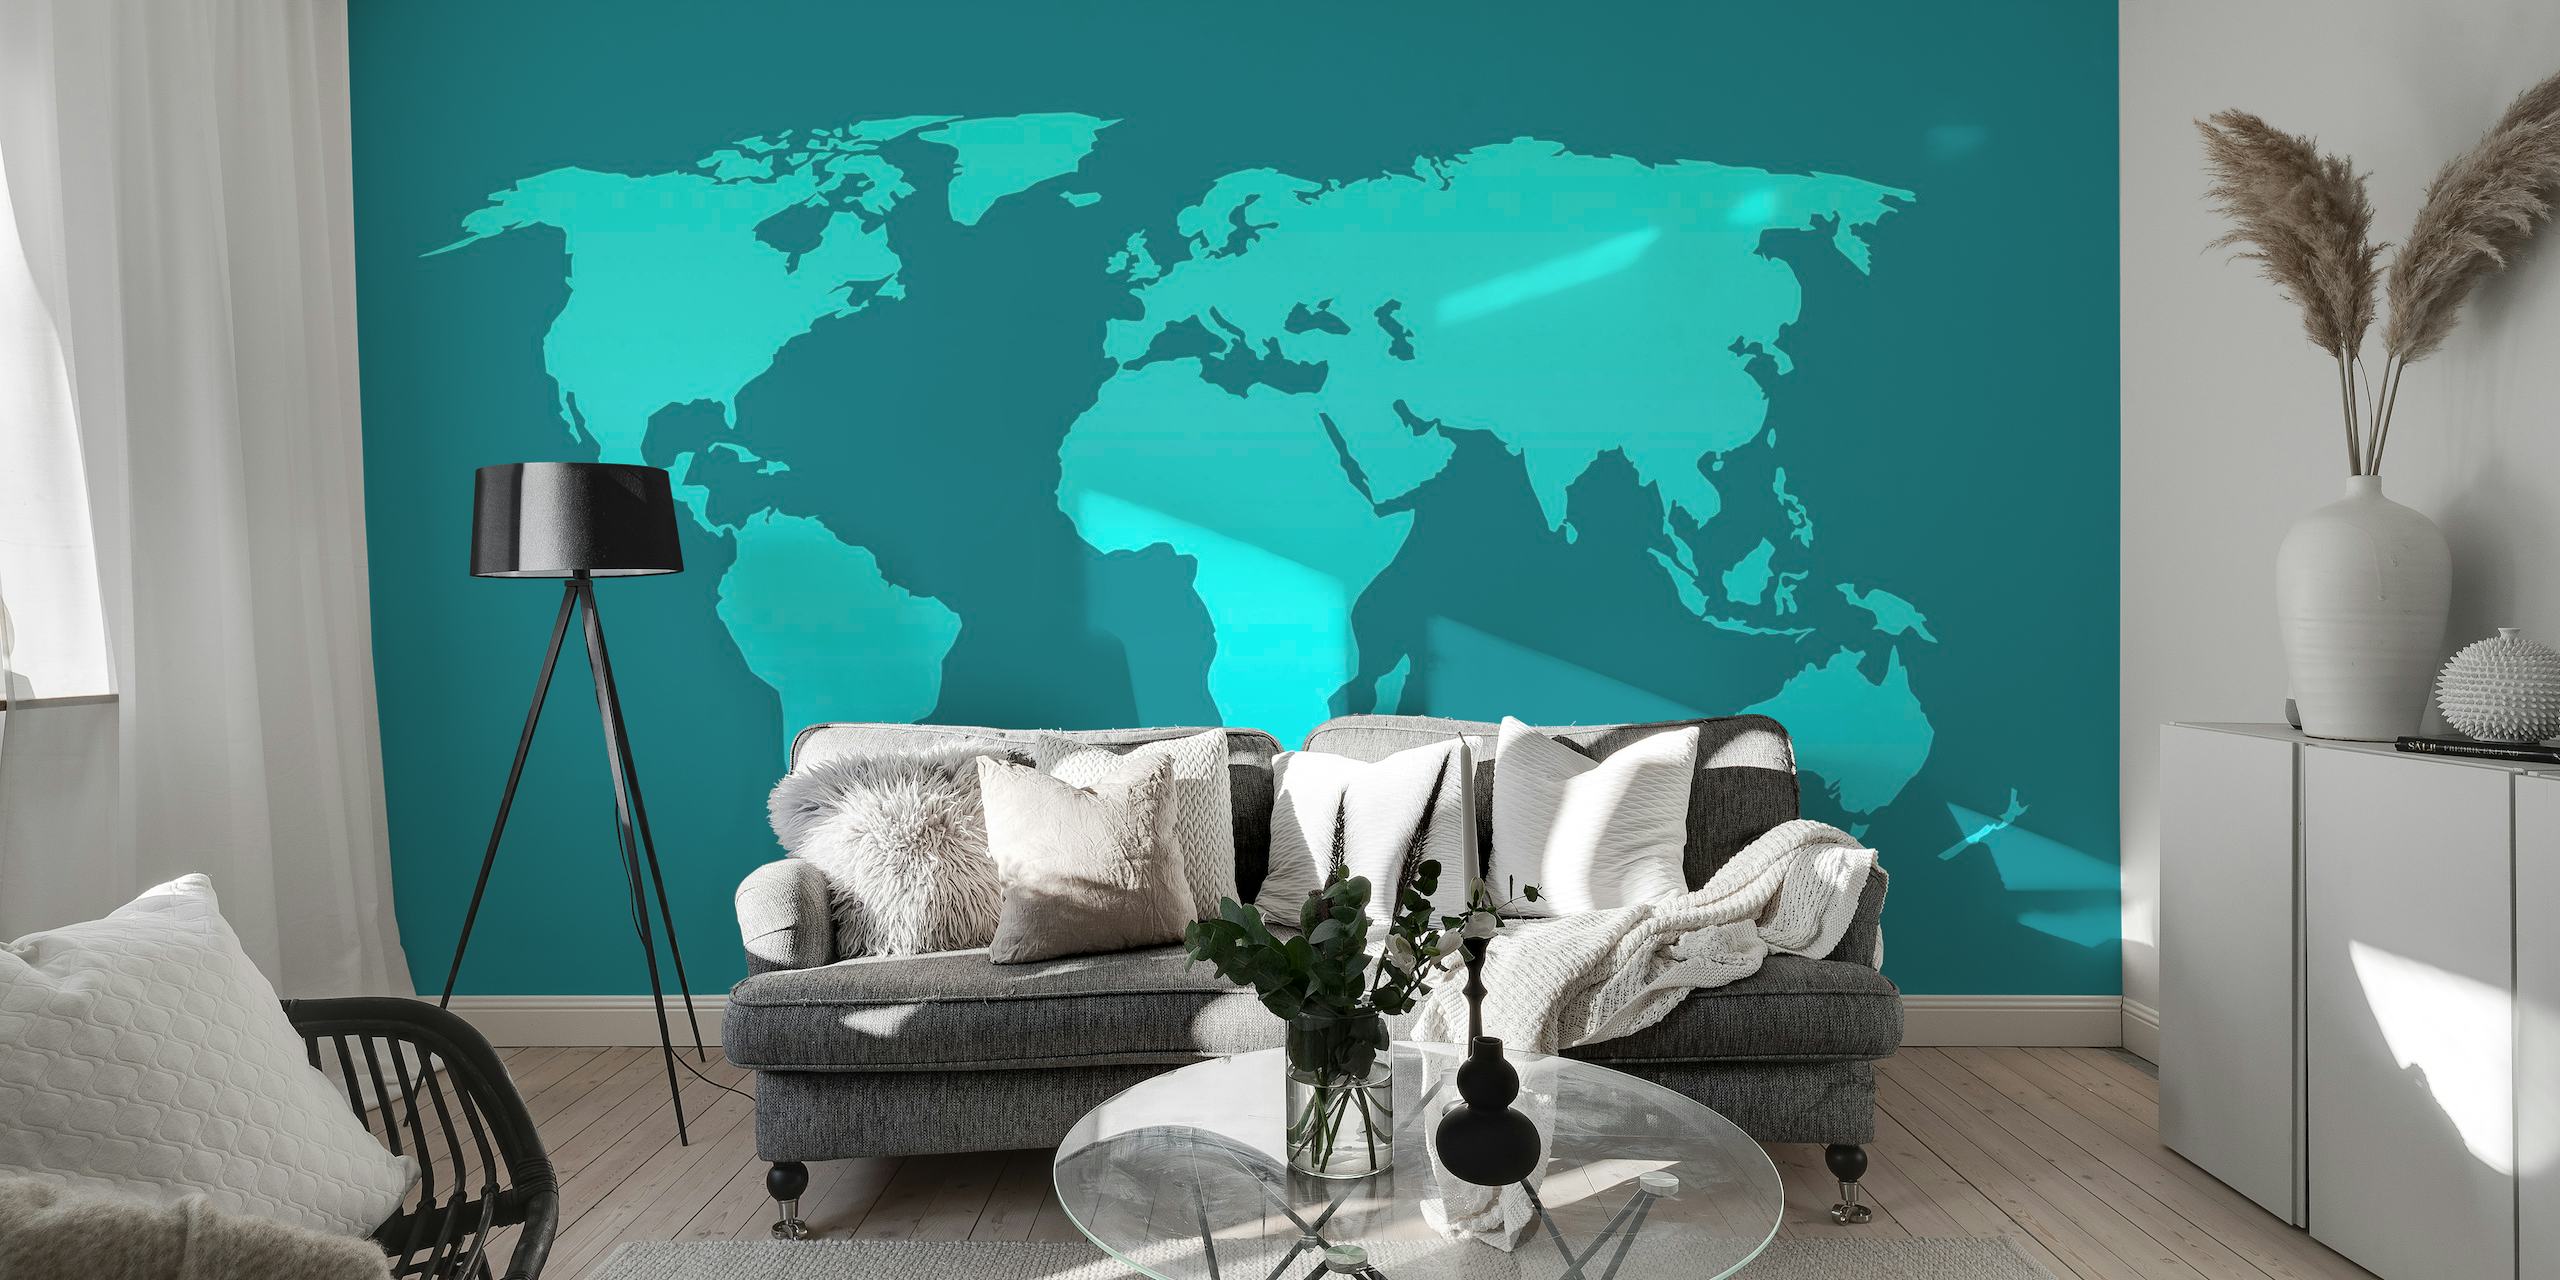 Teal and cyan stylized world map wall mural